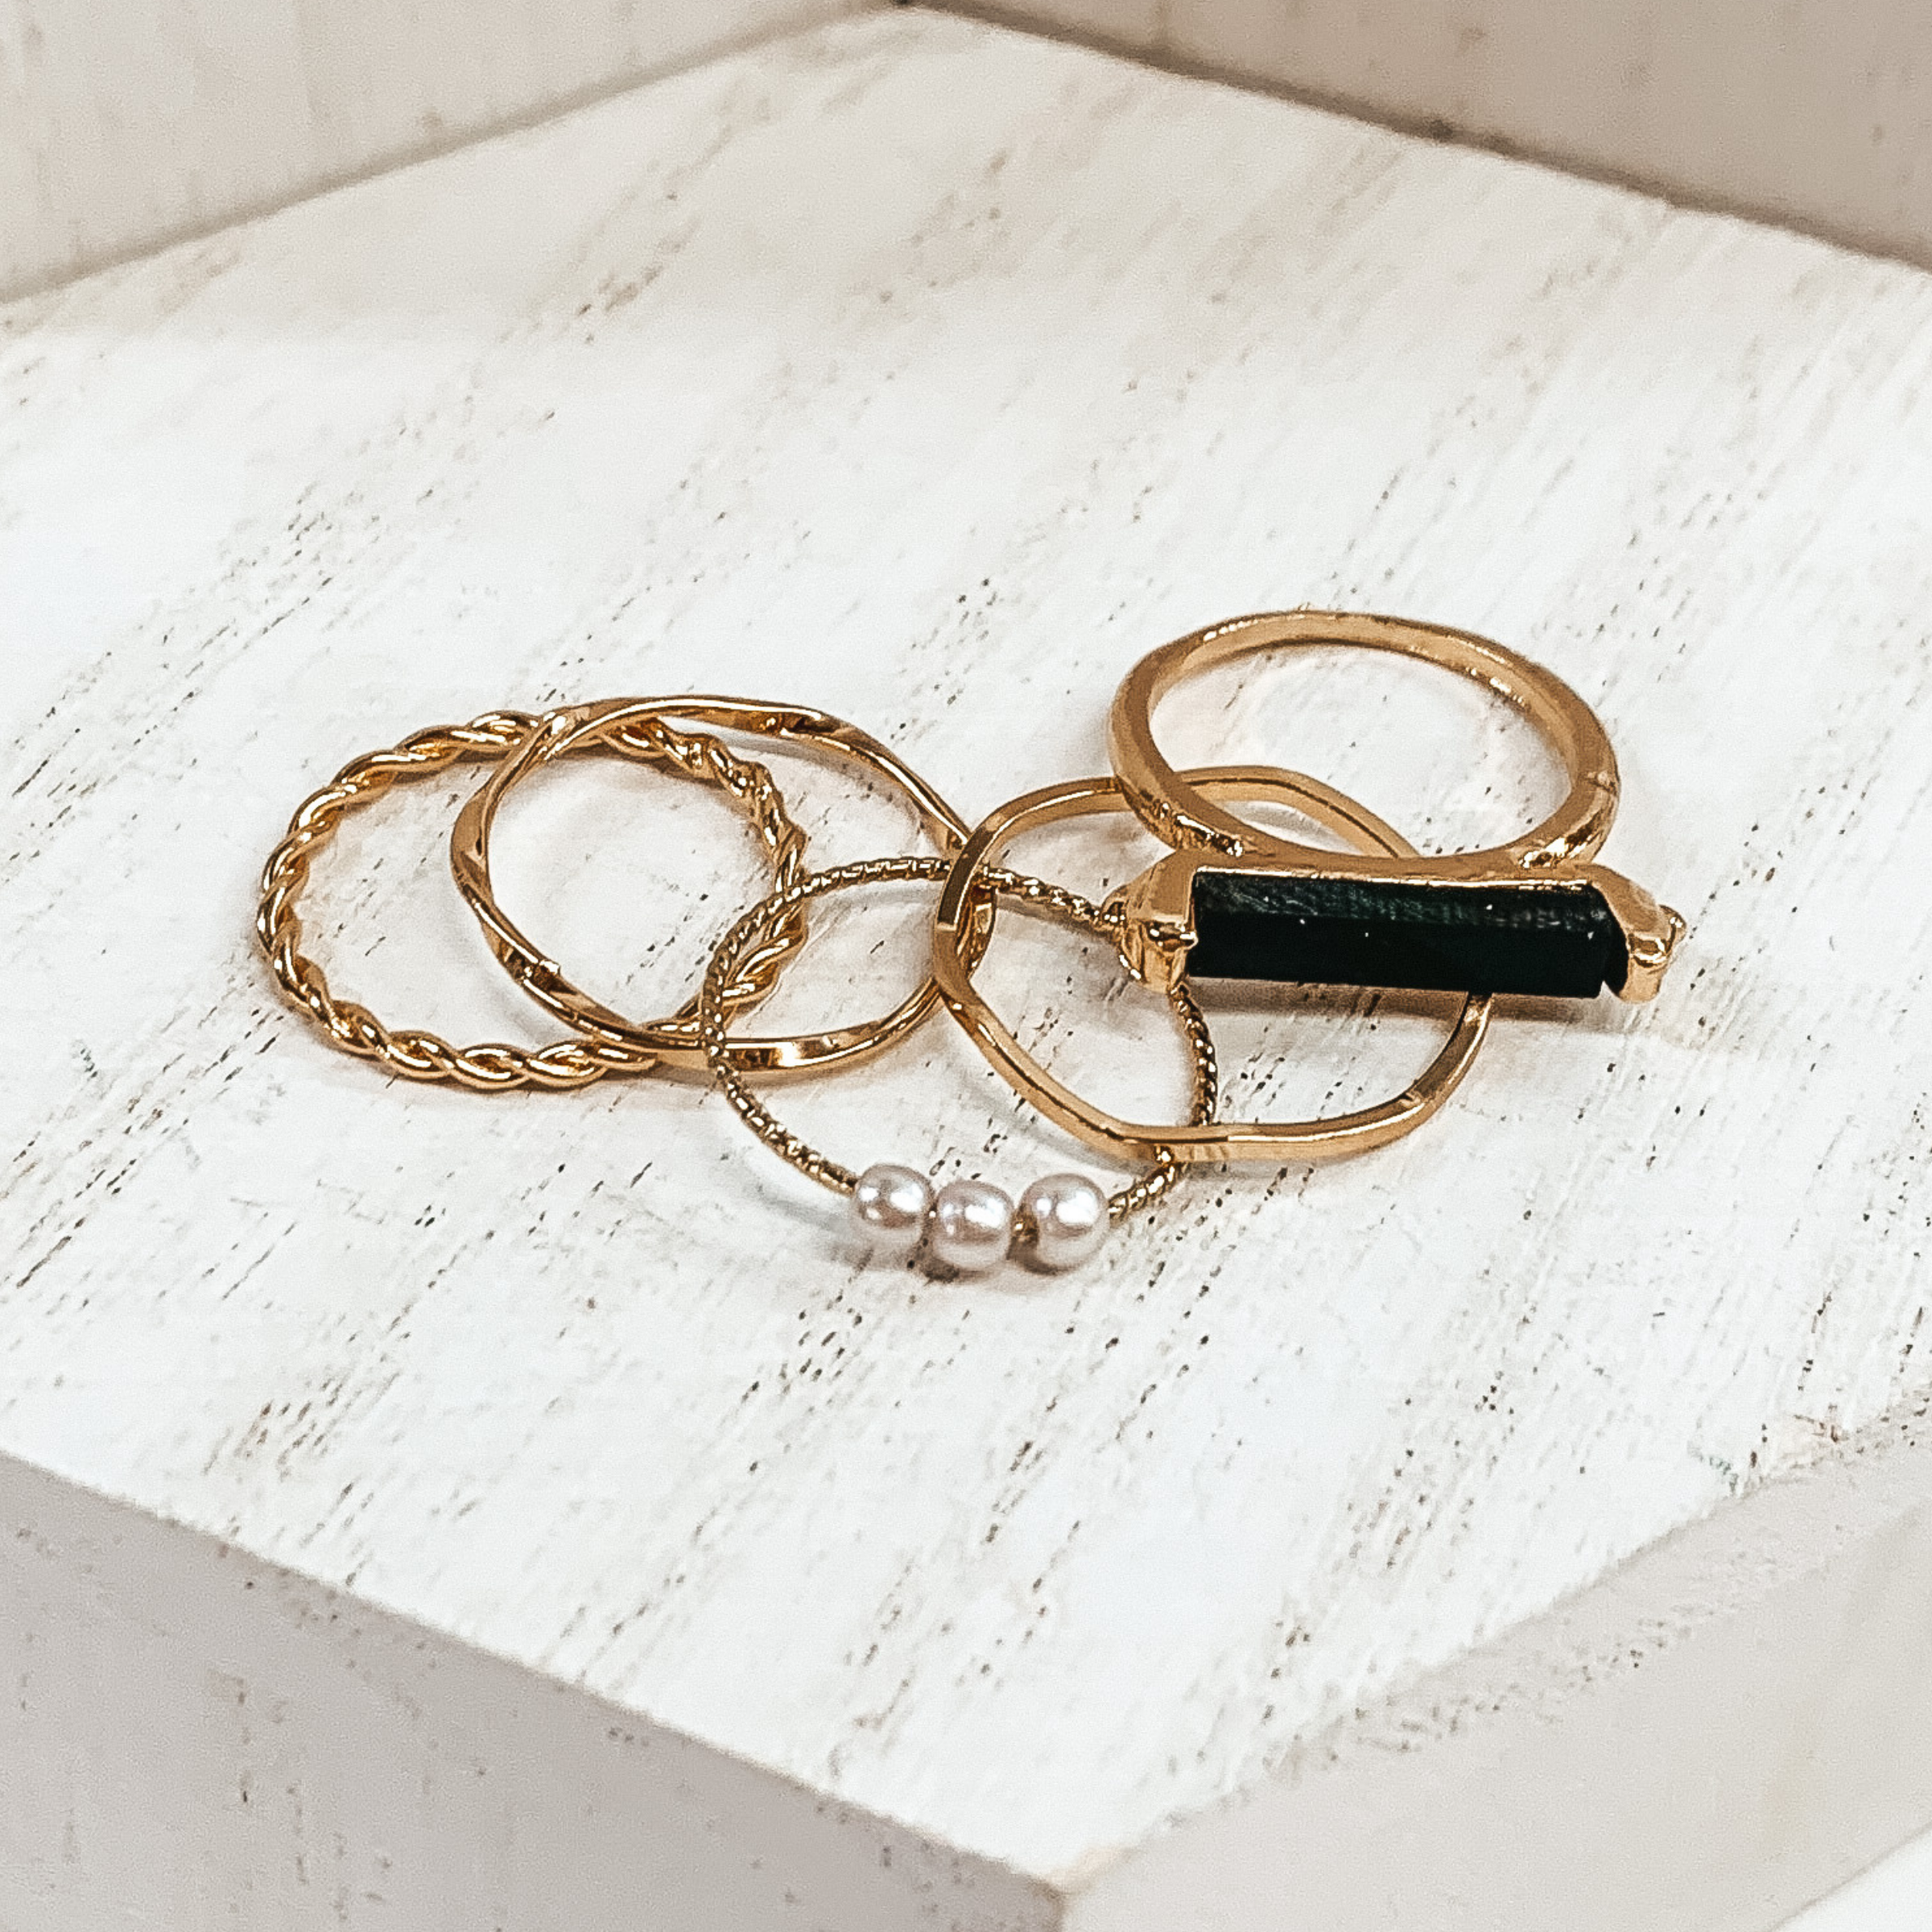 This is a set of five gold rings. You have two twisted rings, one wavy ring, on ring that has 3 pearls, and the last ring has a black bar stone. These rings are pictured on a white background.